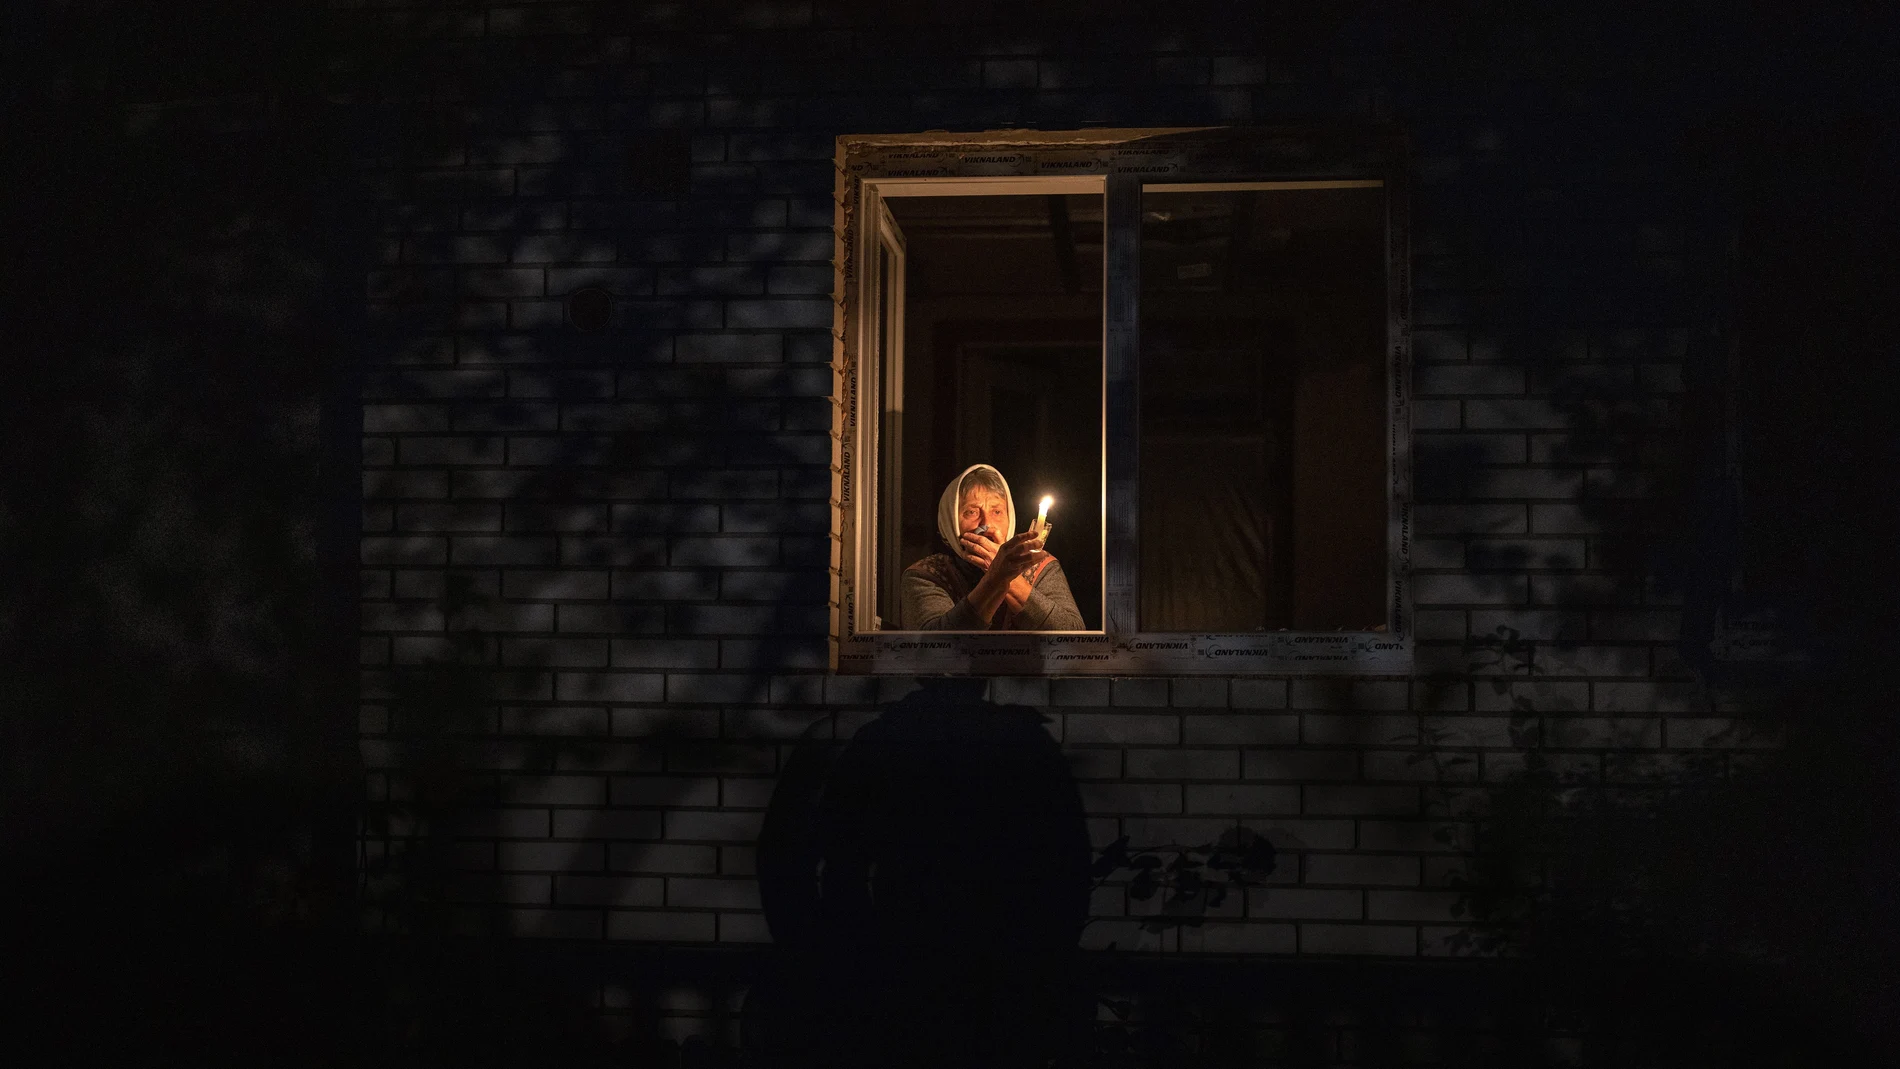 Catherine, 70, holds a candle in the window of her home during a power outage in Borodyanka, Kyiv region, Ukraine